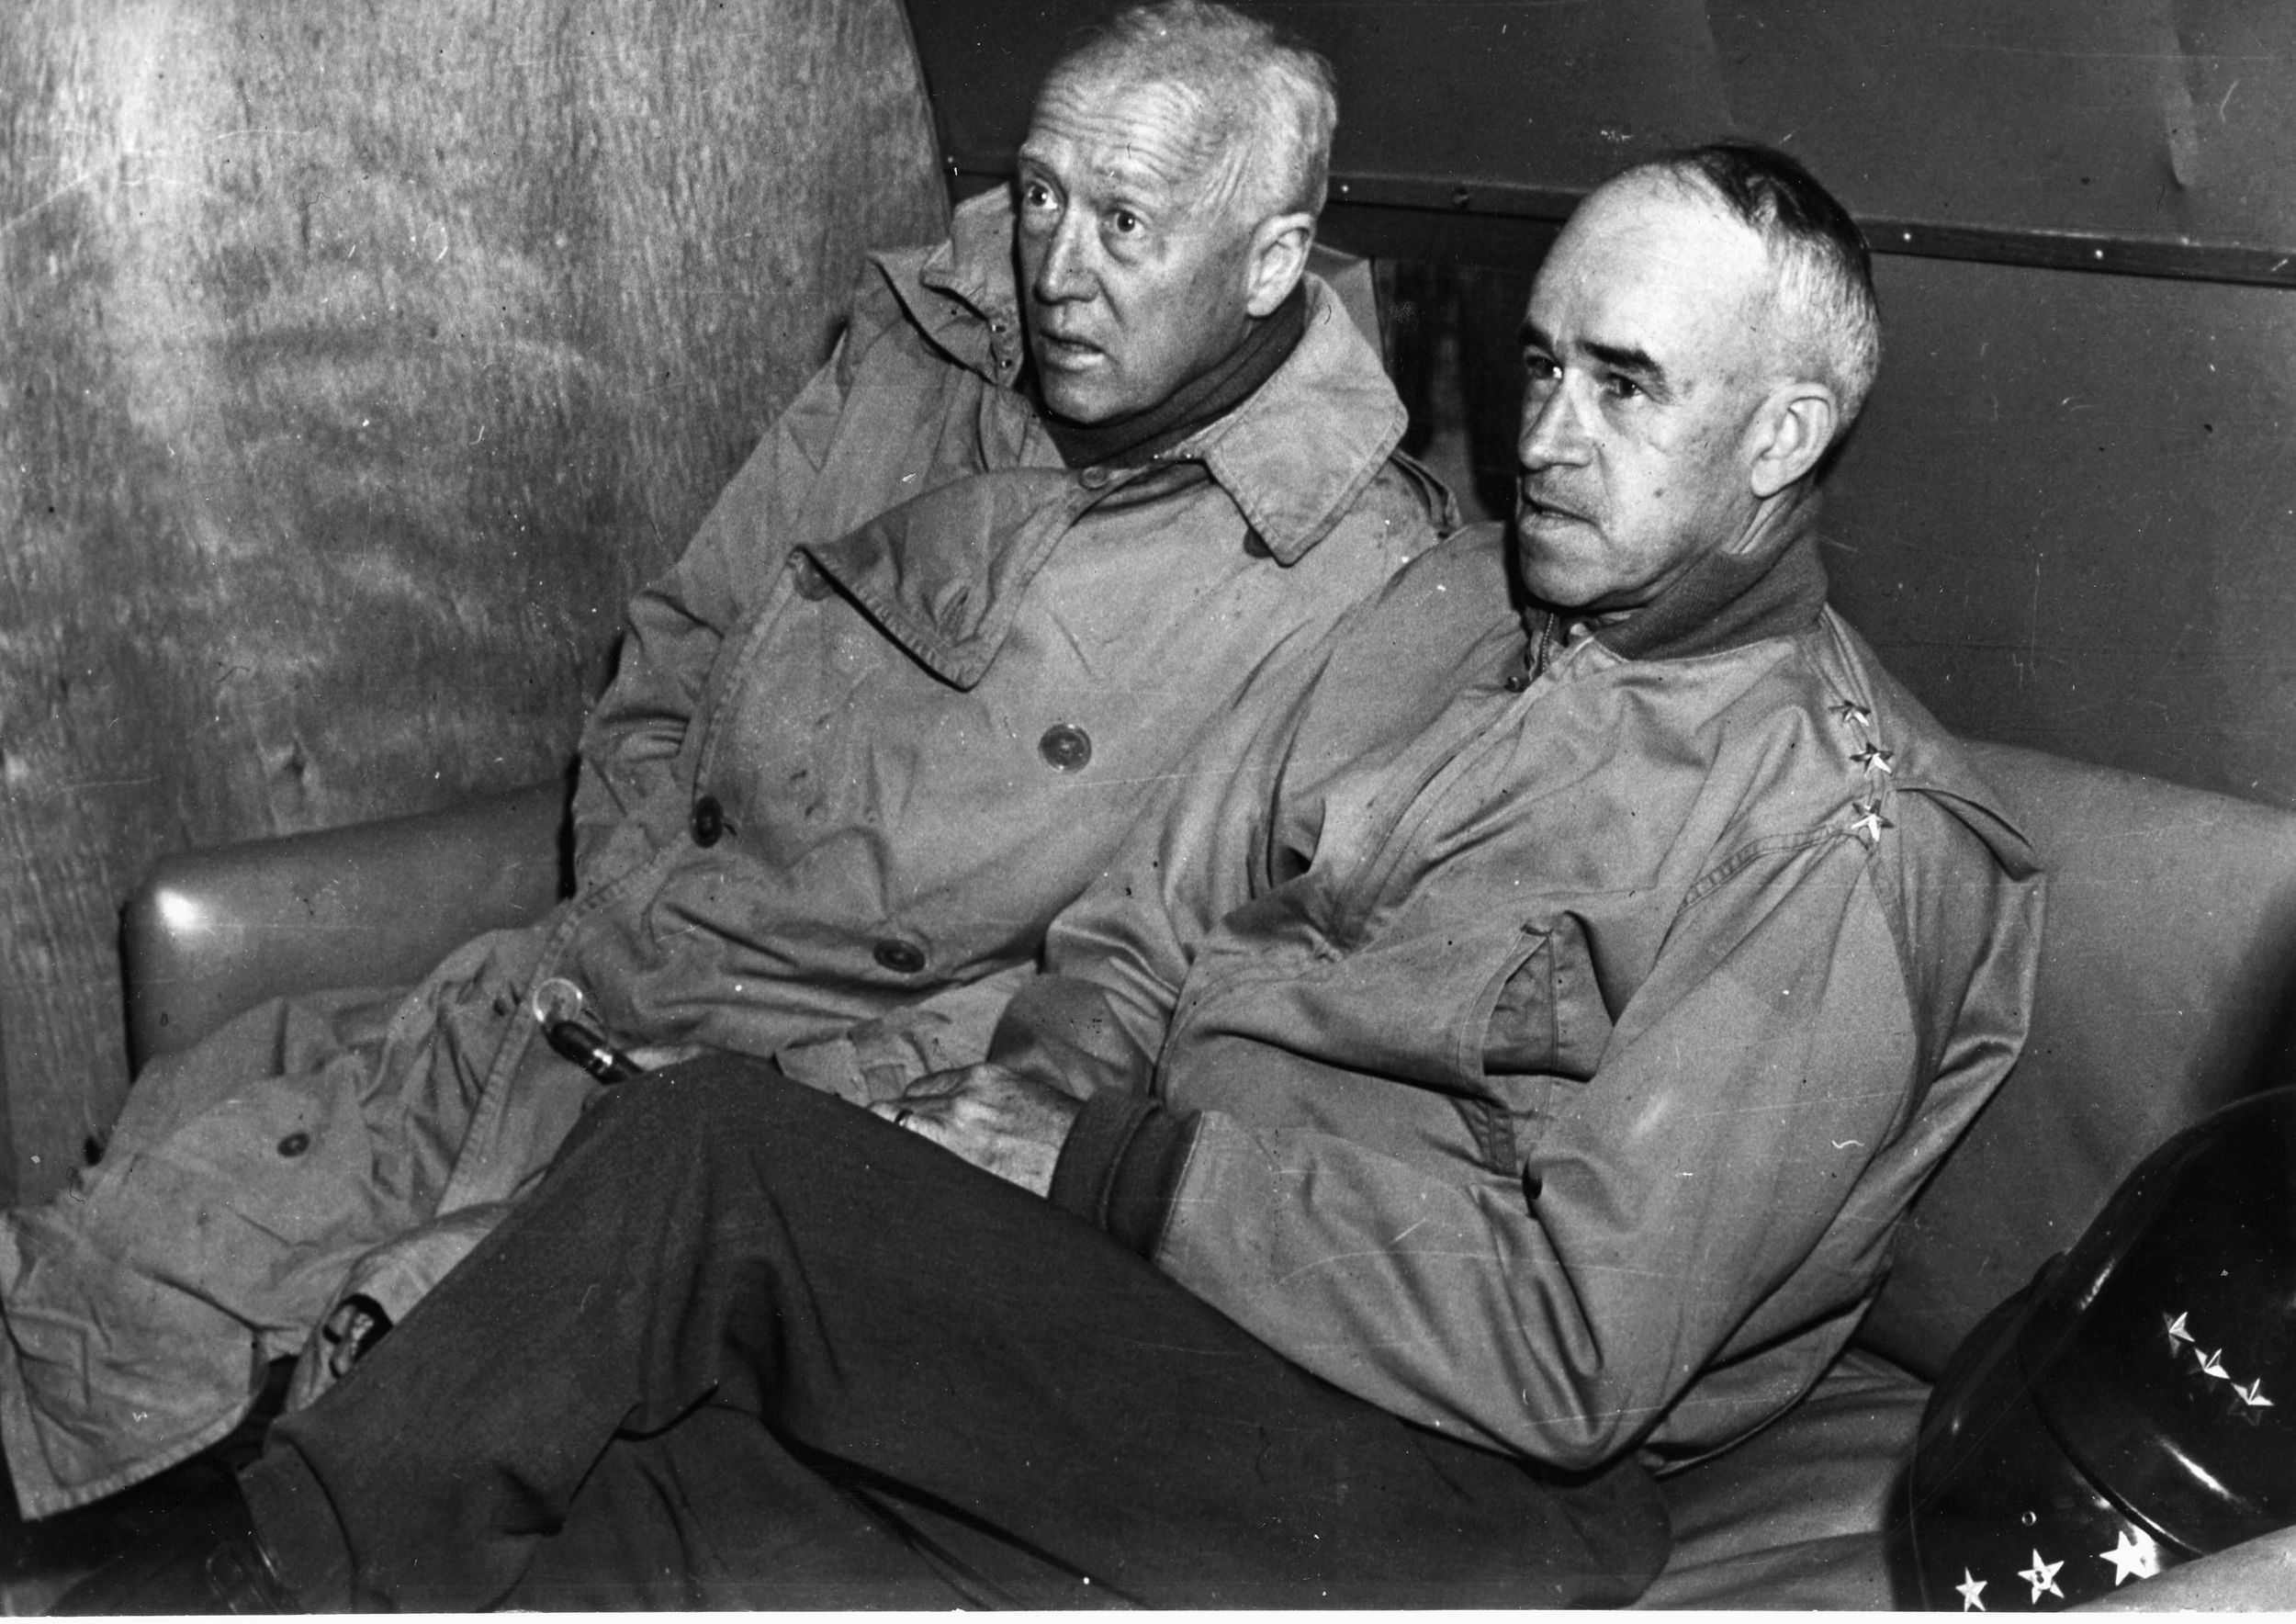 On an inspection flight along the Western  Front on September 9, 1944, General George S. Patton, Jr. (left) and General Omar Bradley reveal their strain and fatigue during the campaign to liberate Western Europe from the Nazis.